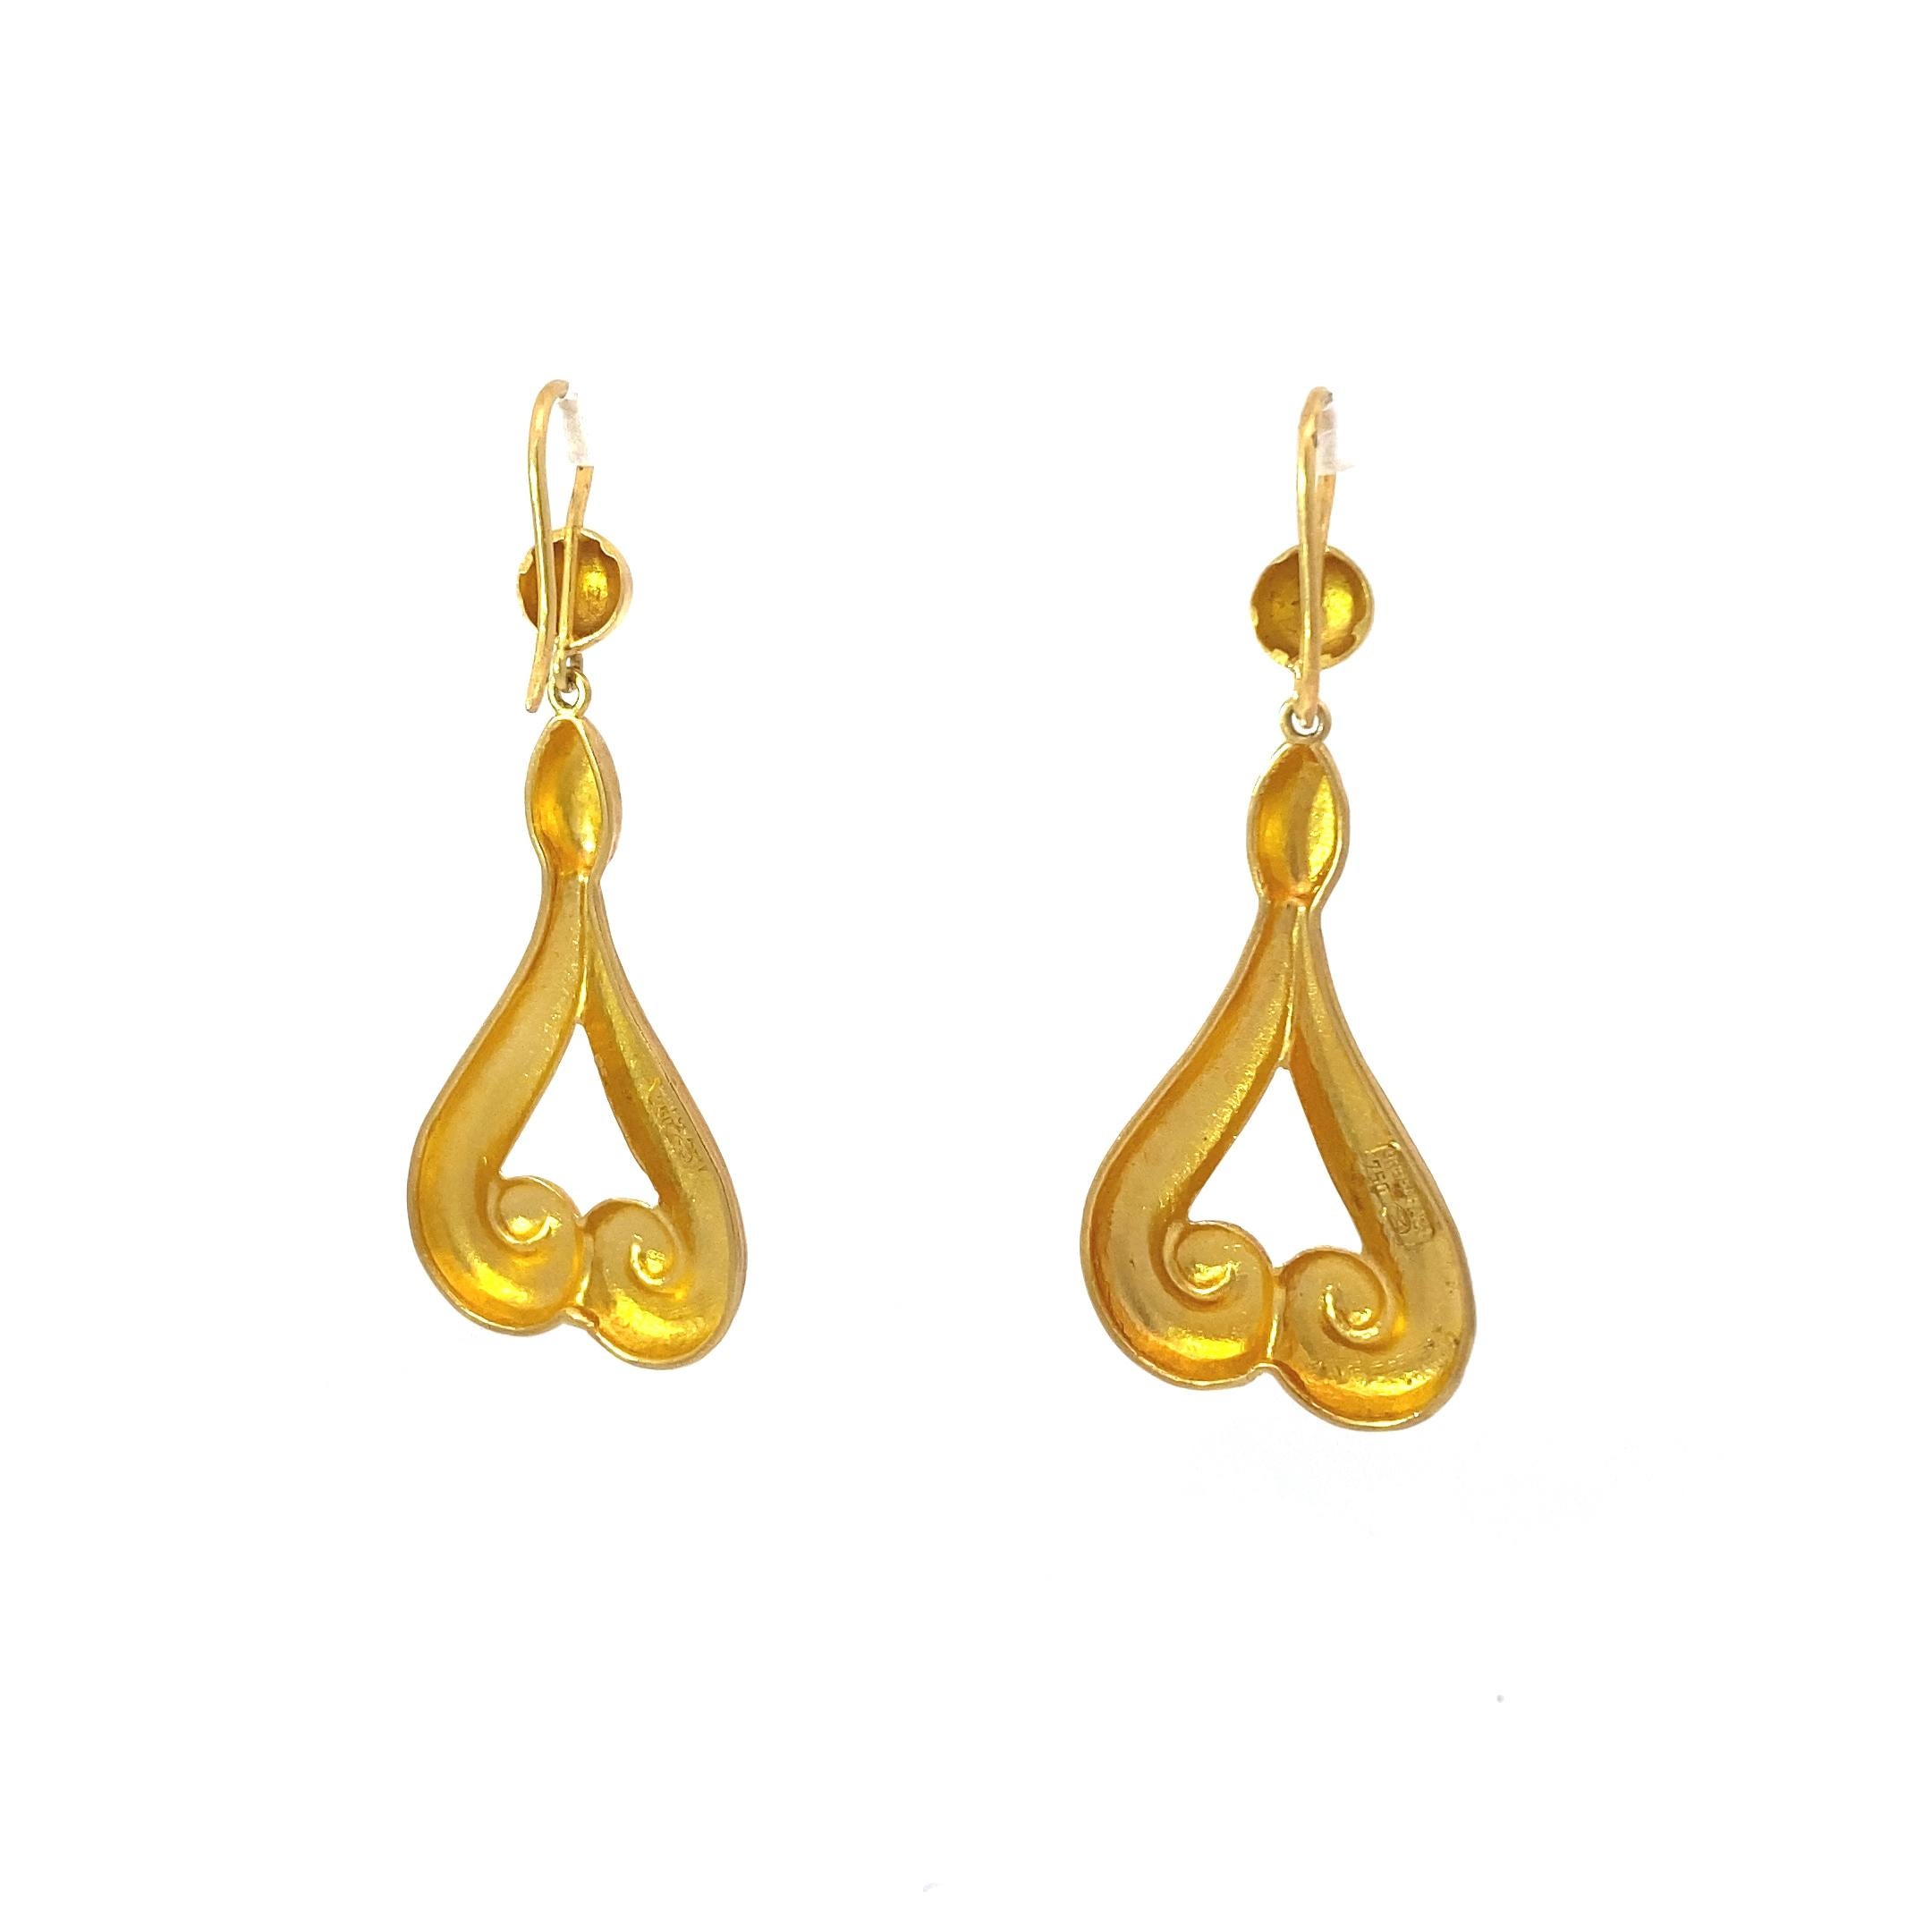 Vintage LaLaounis 10k Gold Drop Earrings In Good Condition For Sale In Brooklyn, NY